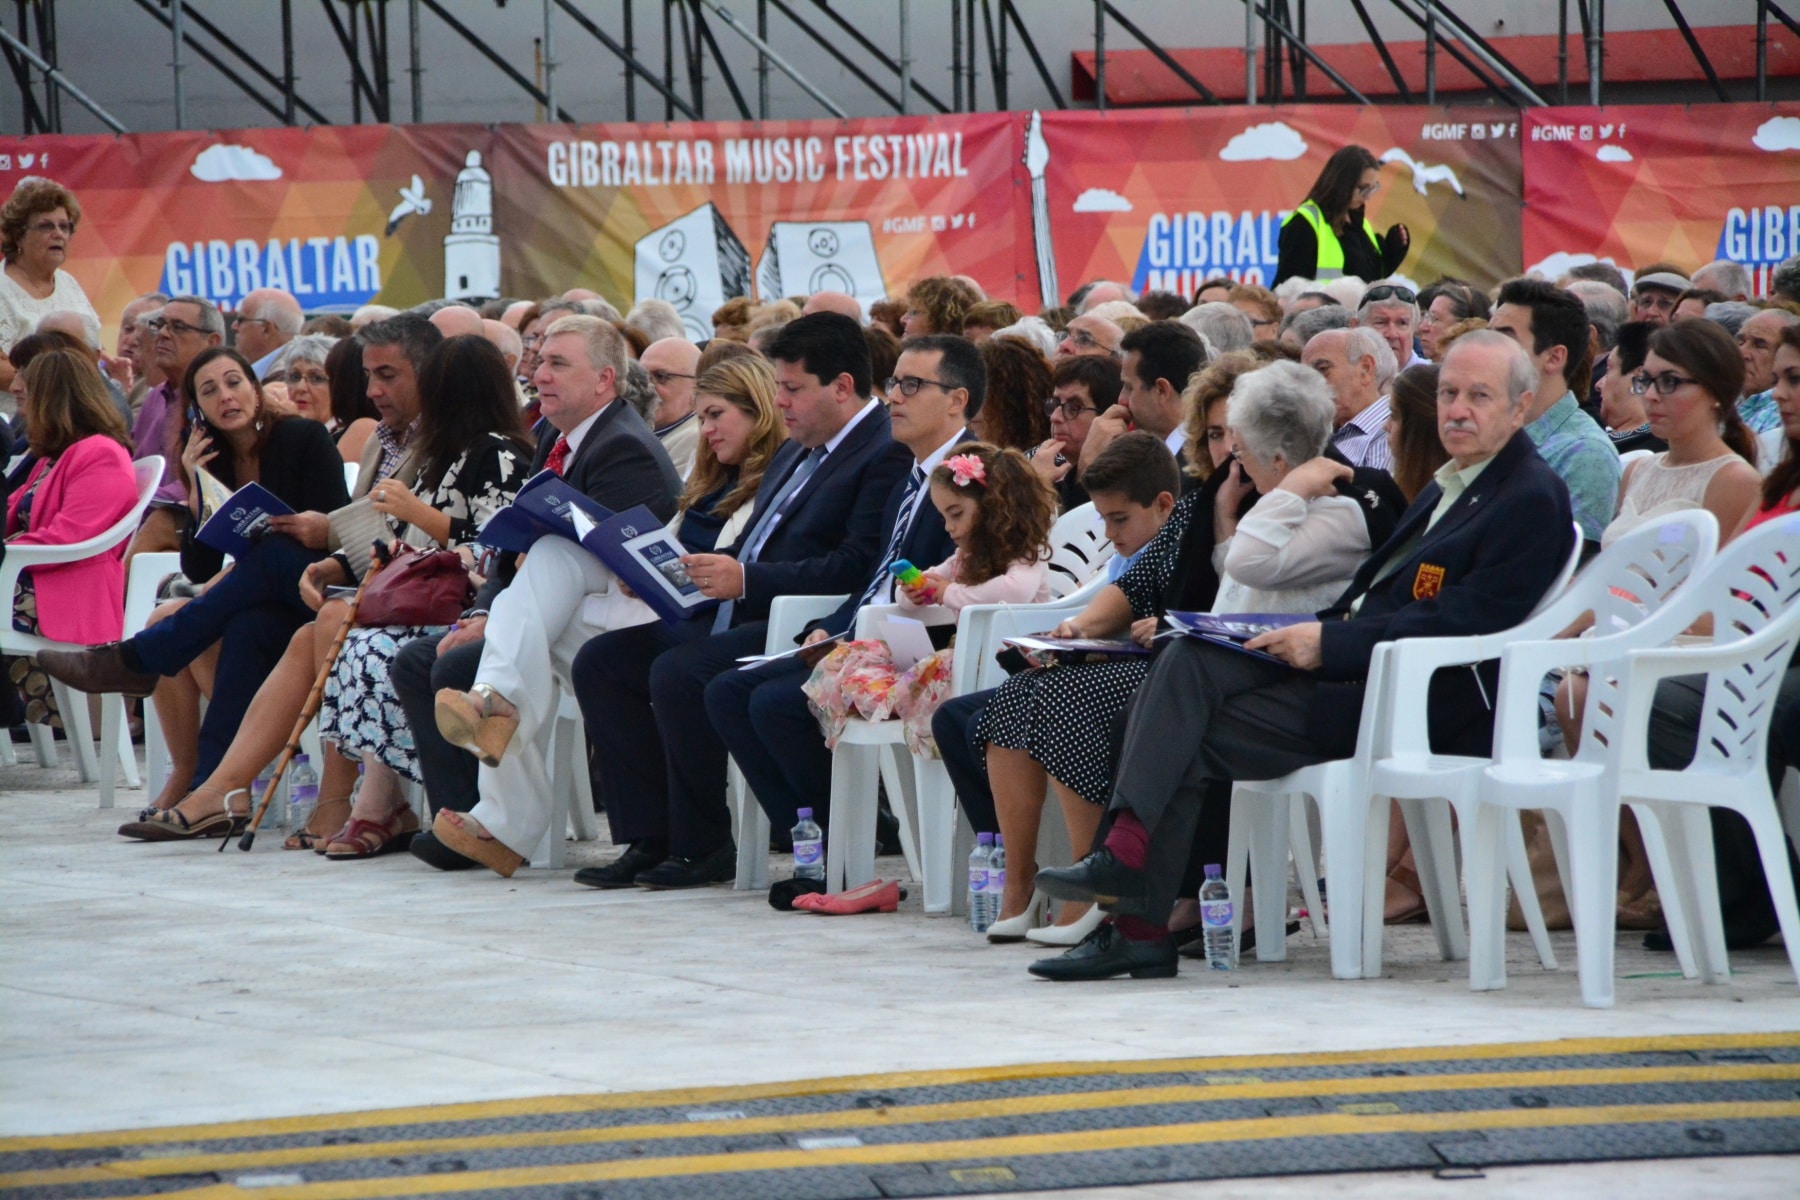 Gibraltar - 7th September 2015 - Gibraltar celebrated its first official Evacuation Commemoration Day with a concert hosted by the government of Gibraltar for some 800 evacuee survivors from the Second World War. The concert was held at the Victoria Stadium using the same stages and facilities used the day earlier by the Gibraltar Music Festival.Evacuation Commemoration Day was officially introduced earlier this year after Gibraltar celebrated 75 years since the whole of the Gibraltar population was evacuated during the second World War. Many of the Gibraltarians were taken to London where some died during the London blitz. Whilst most stayed in London, others were taken to Northern Ireland, Madiera and Jamacia. It was only a confrontation between population leaders that Gibraltarians were allowed back on the Rock after British officials had initially refused to return the population back to its rightful home.